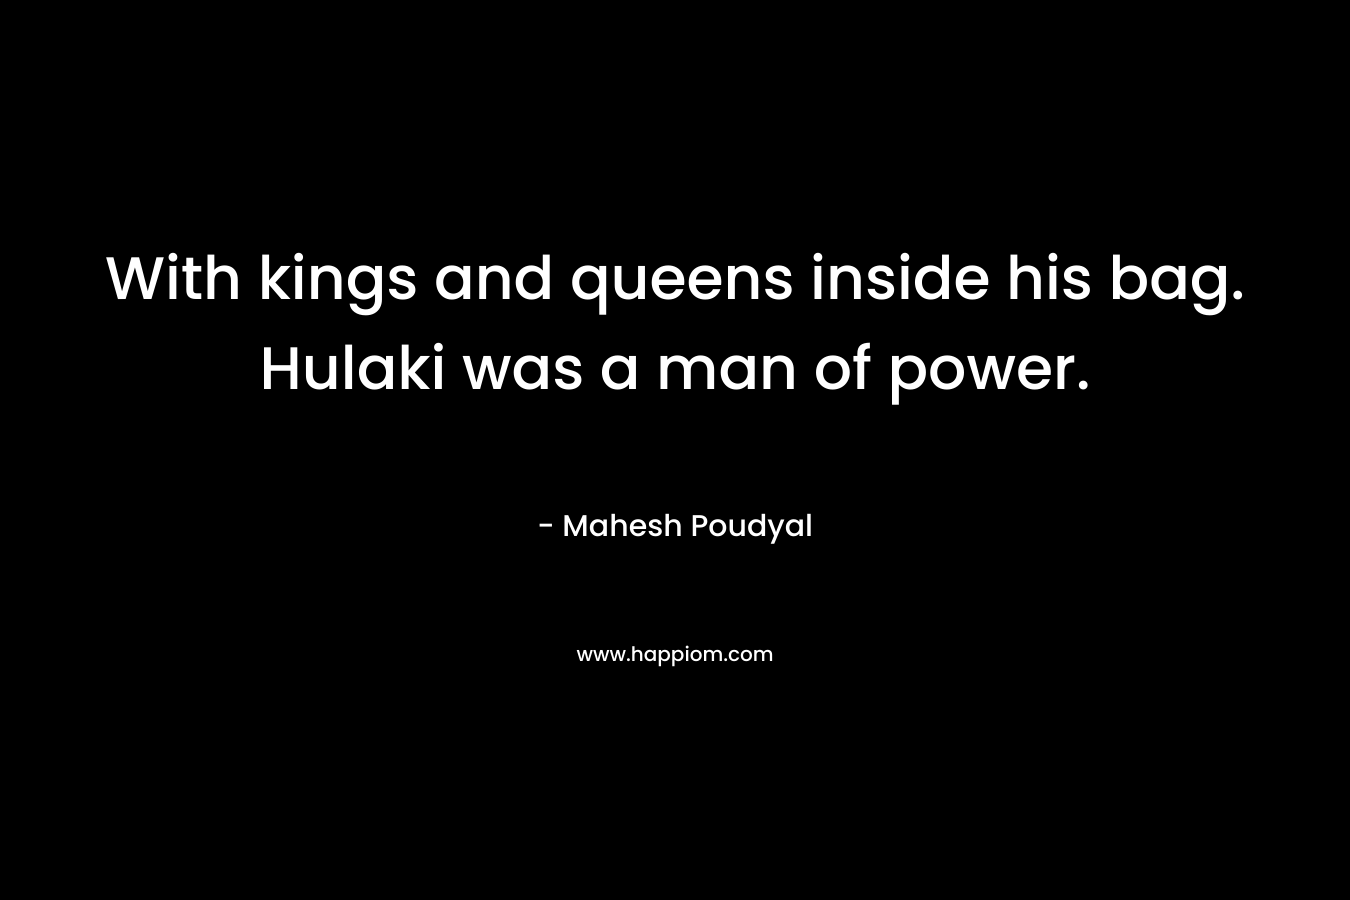 With kings and queens inside his bag. Hulaki was a man of power. – Mahesh Poudyal